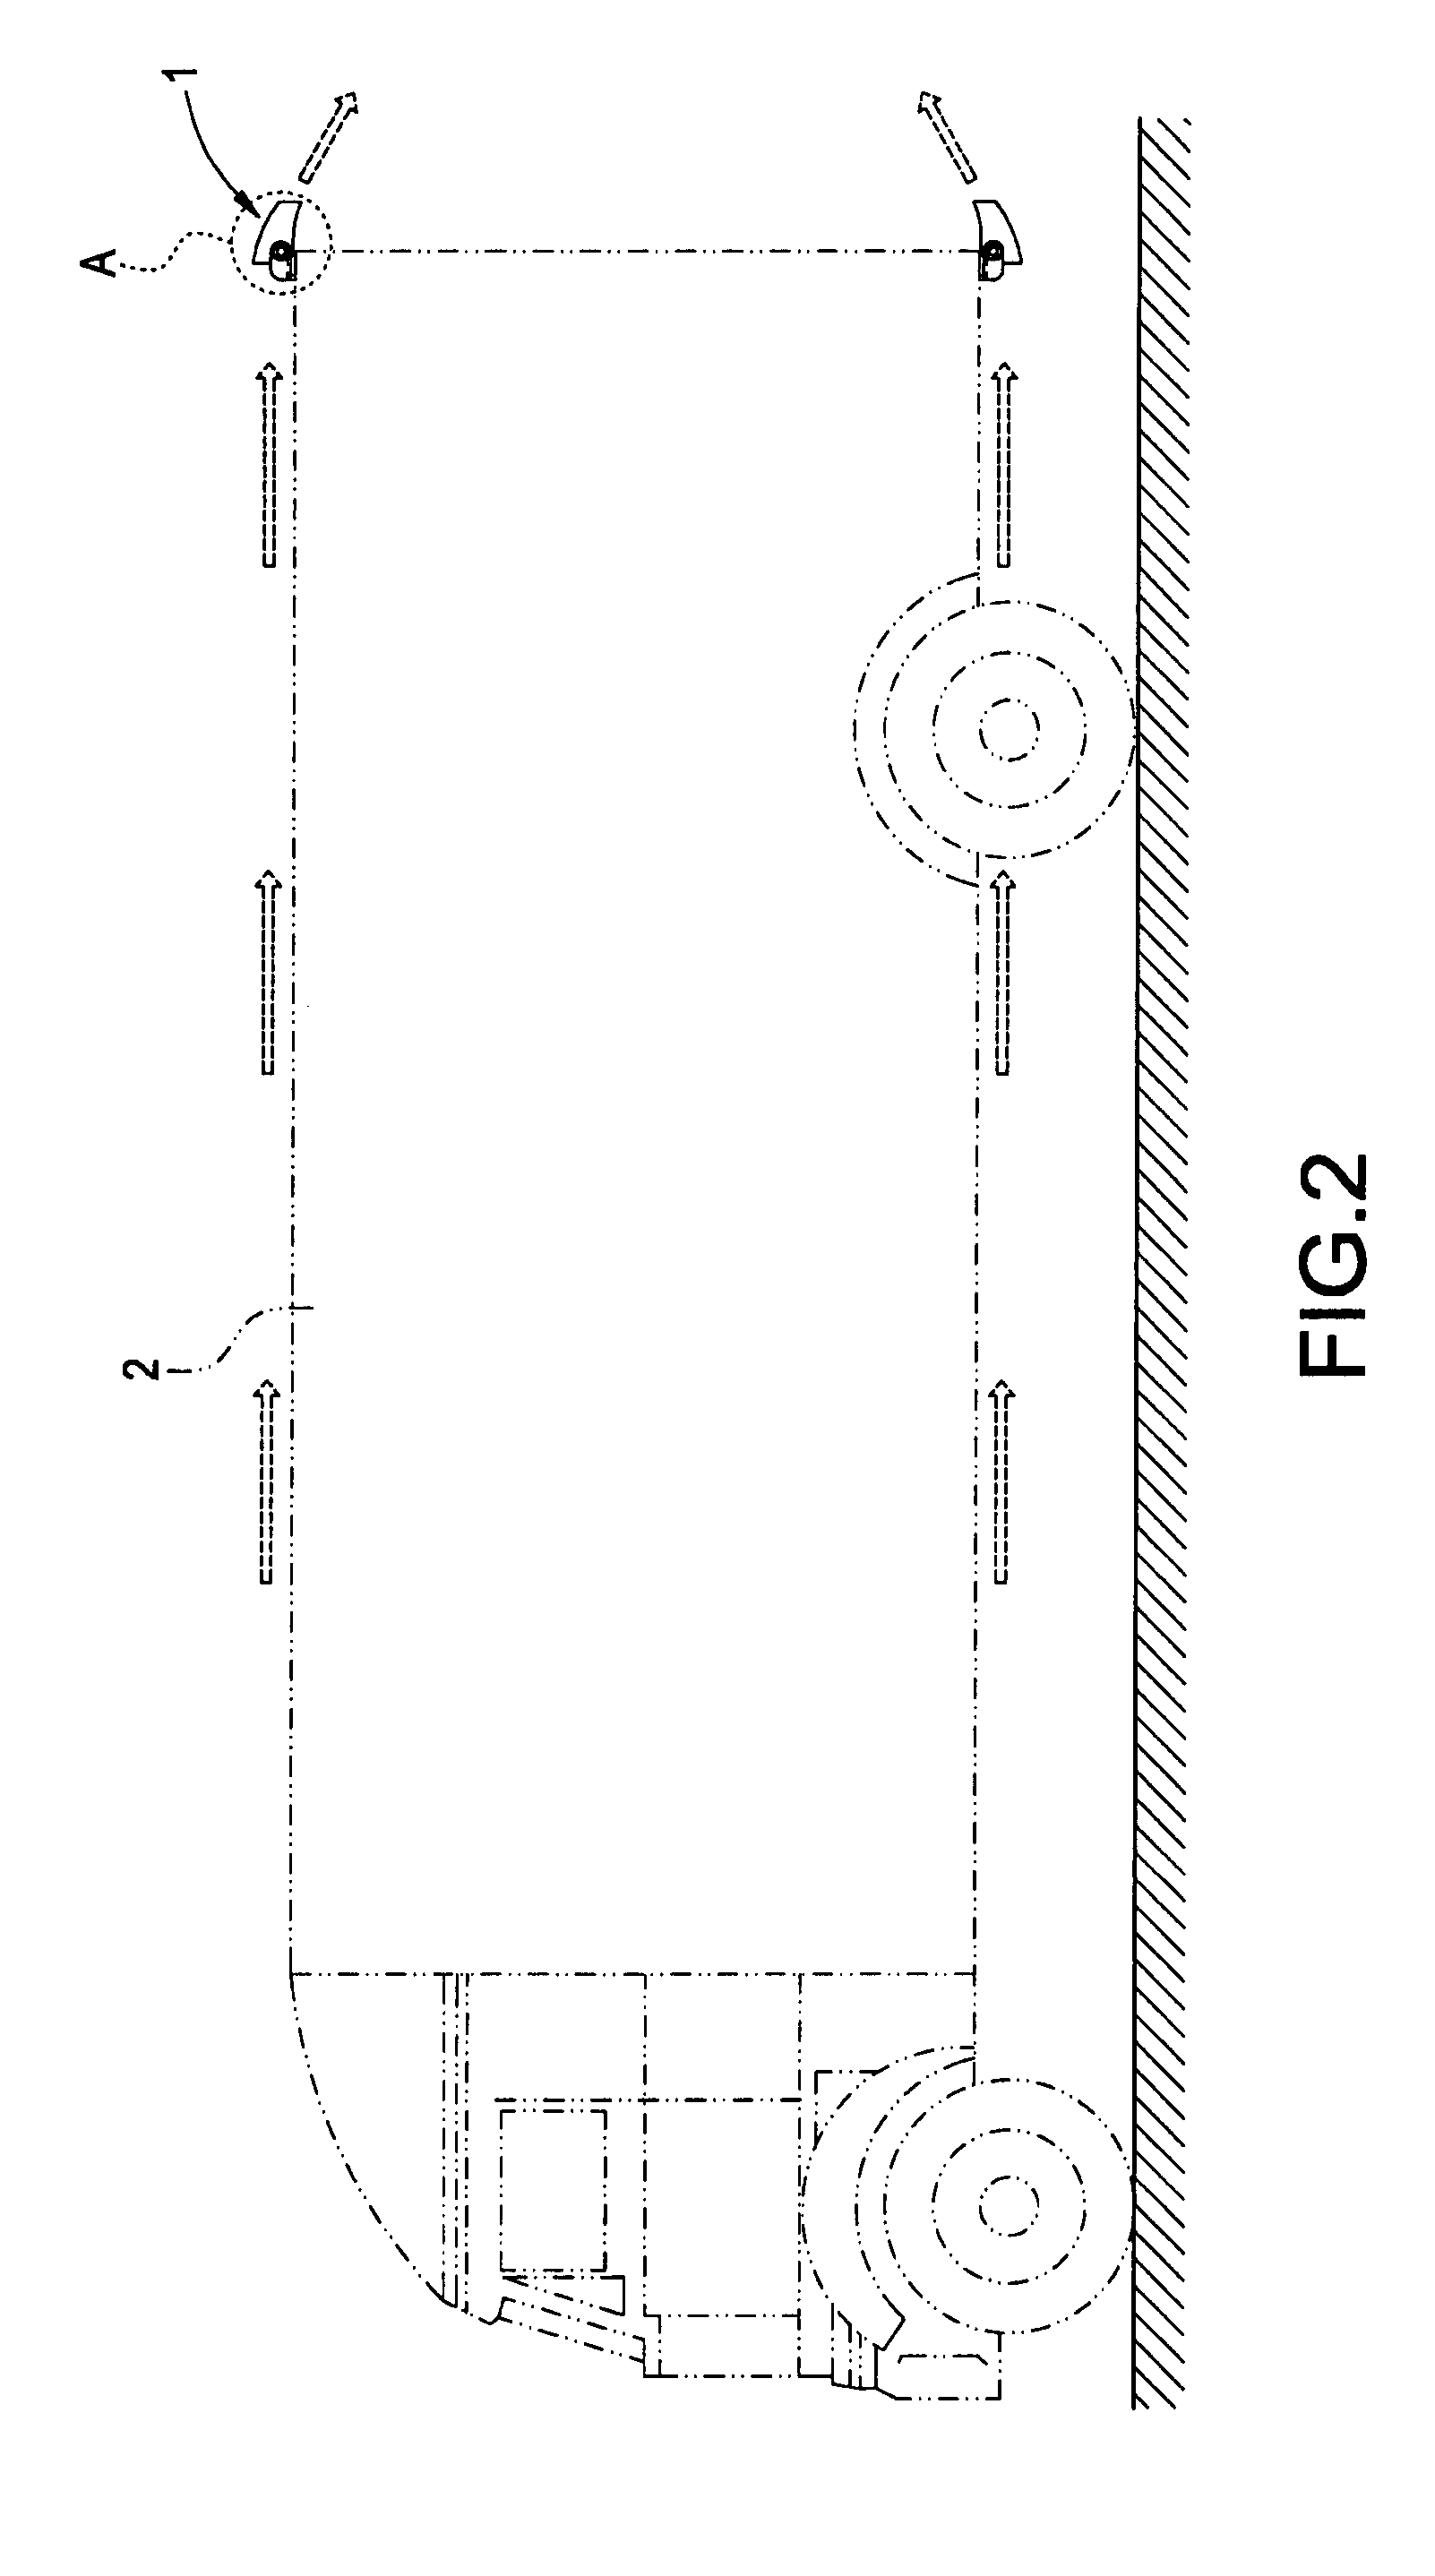 Air-guiding assembly for reducing wind drag